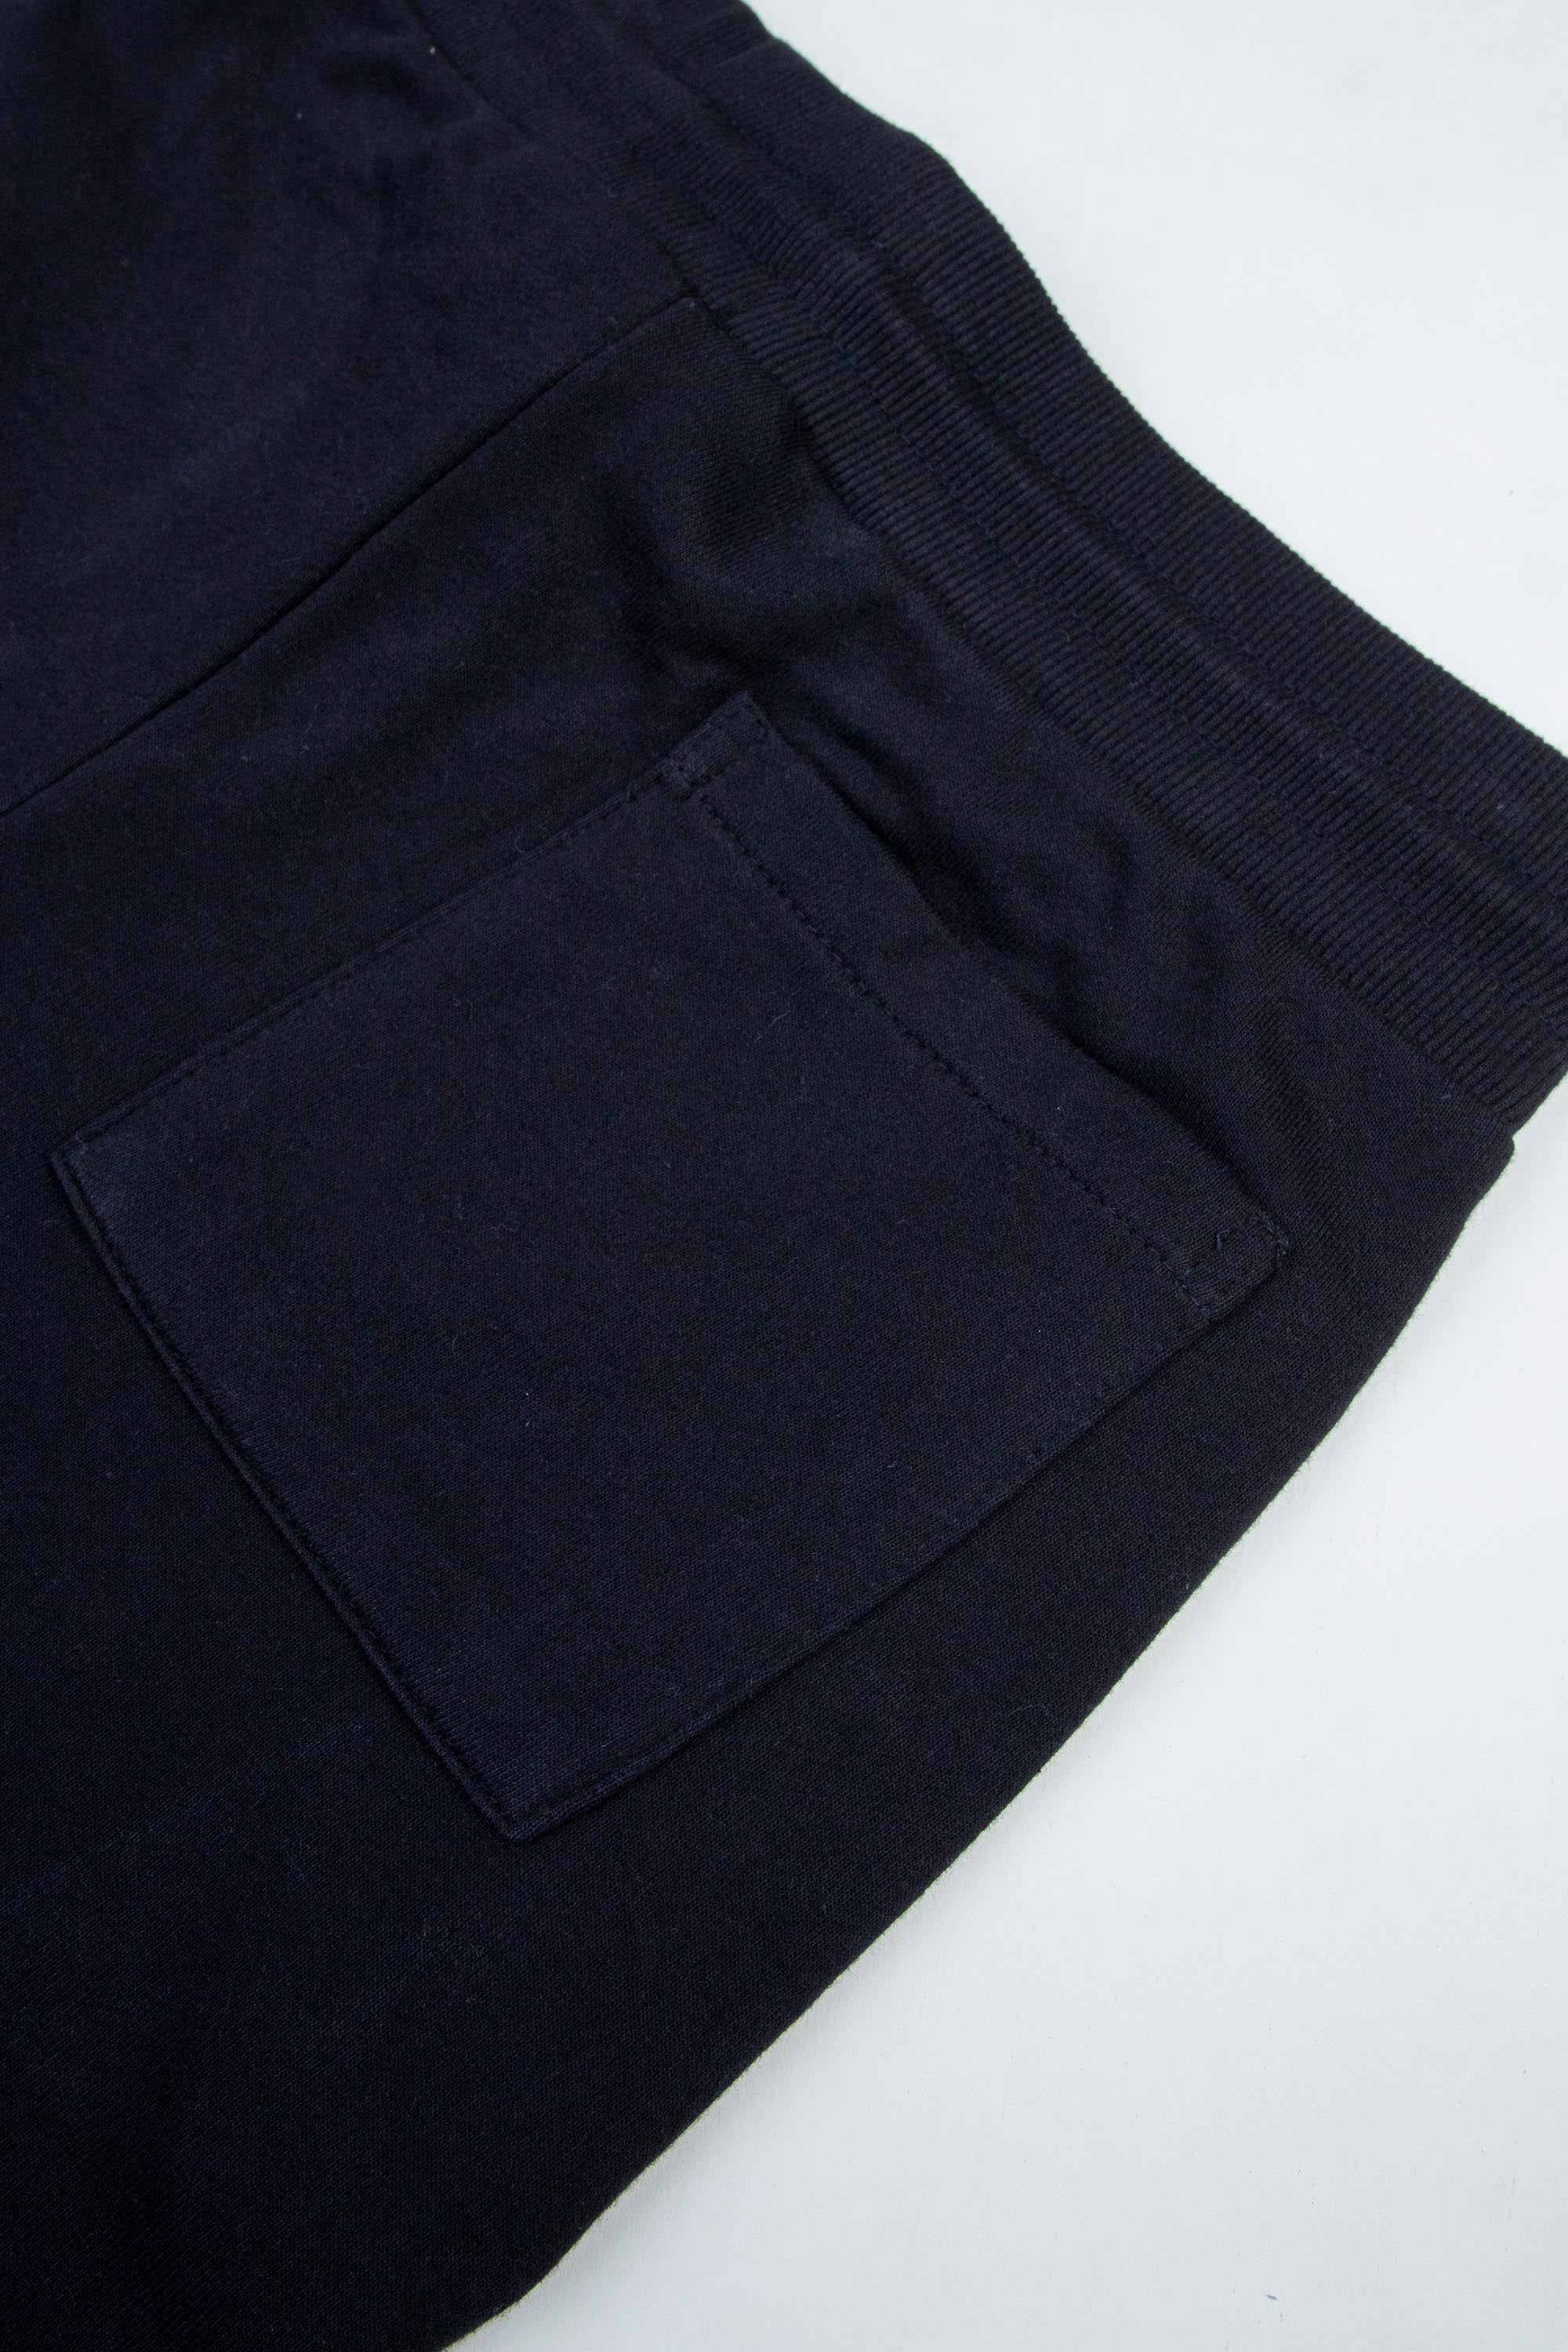 Black Terry Trousers